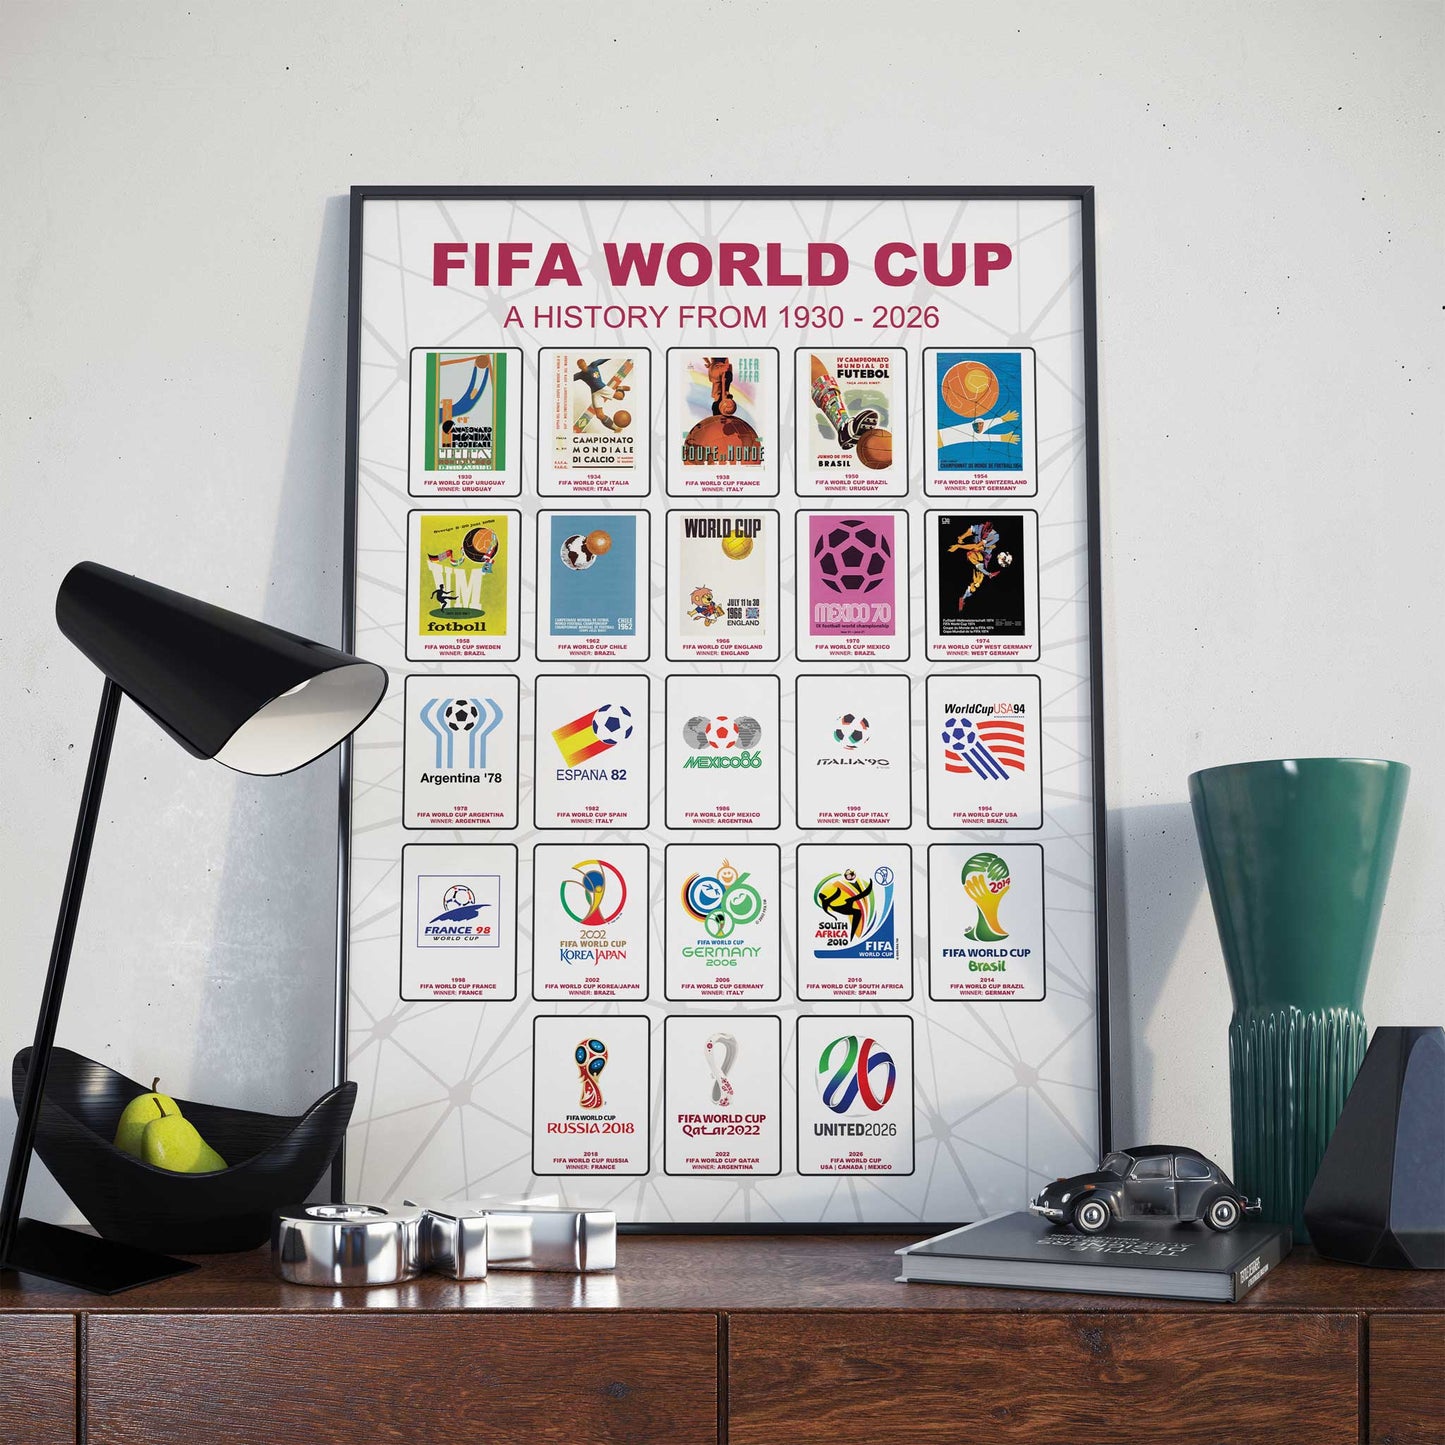 World Cup History Football Poster - All World Cup Logos From 1930 to 2026